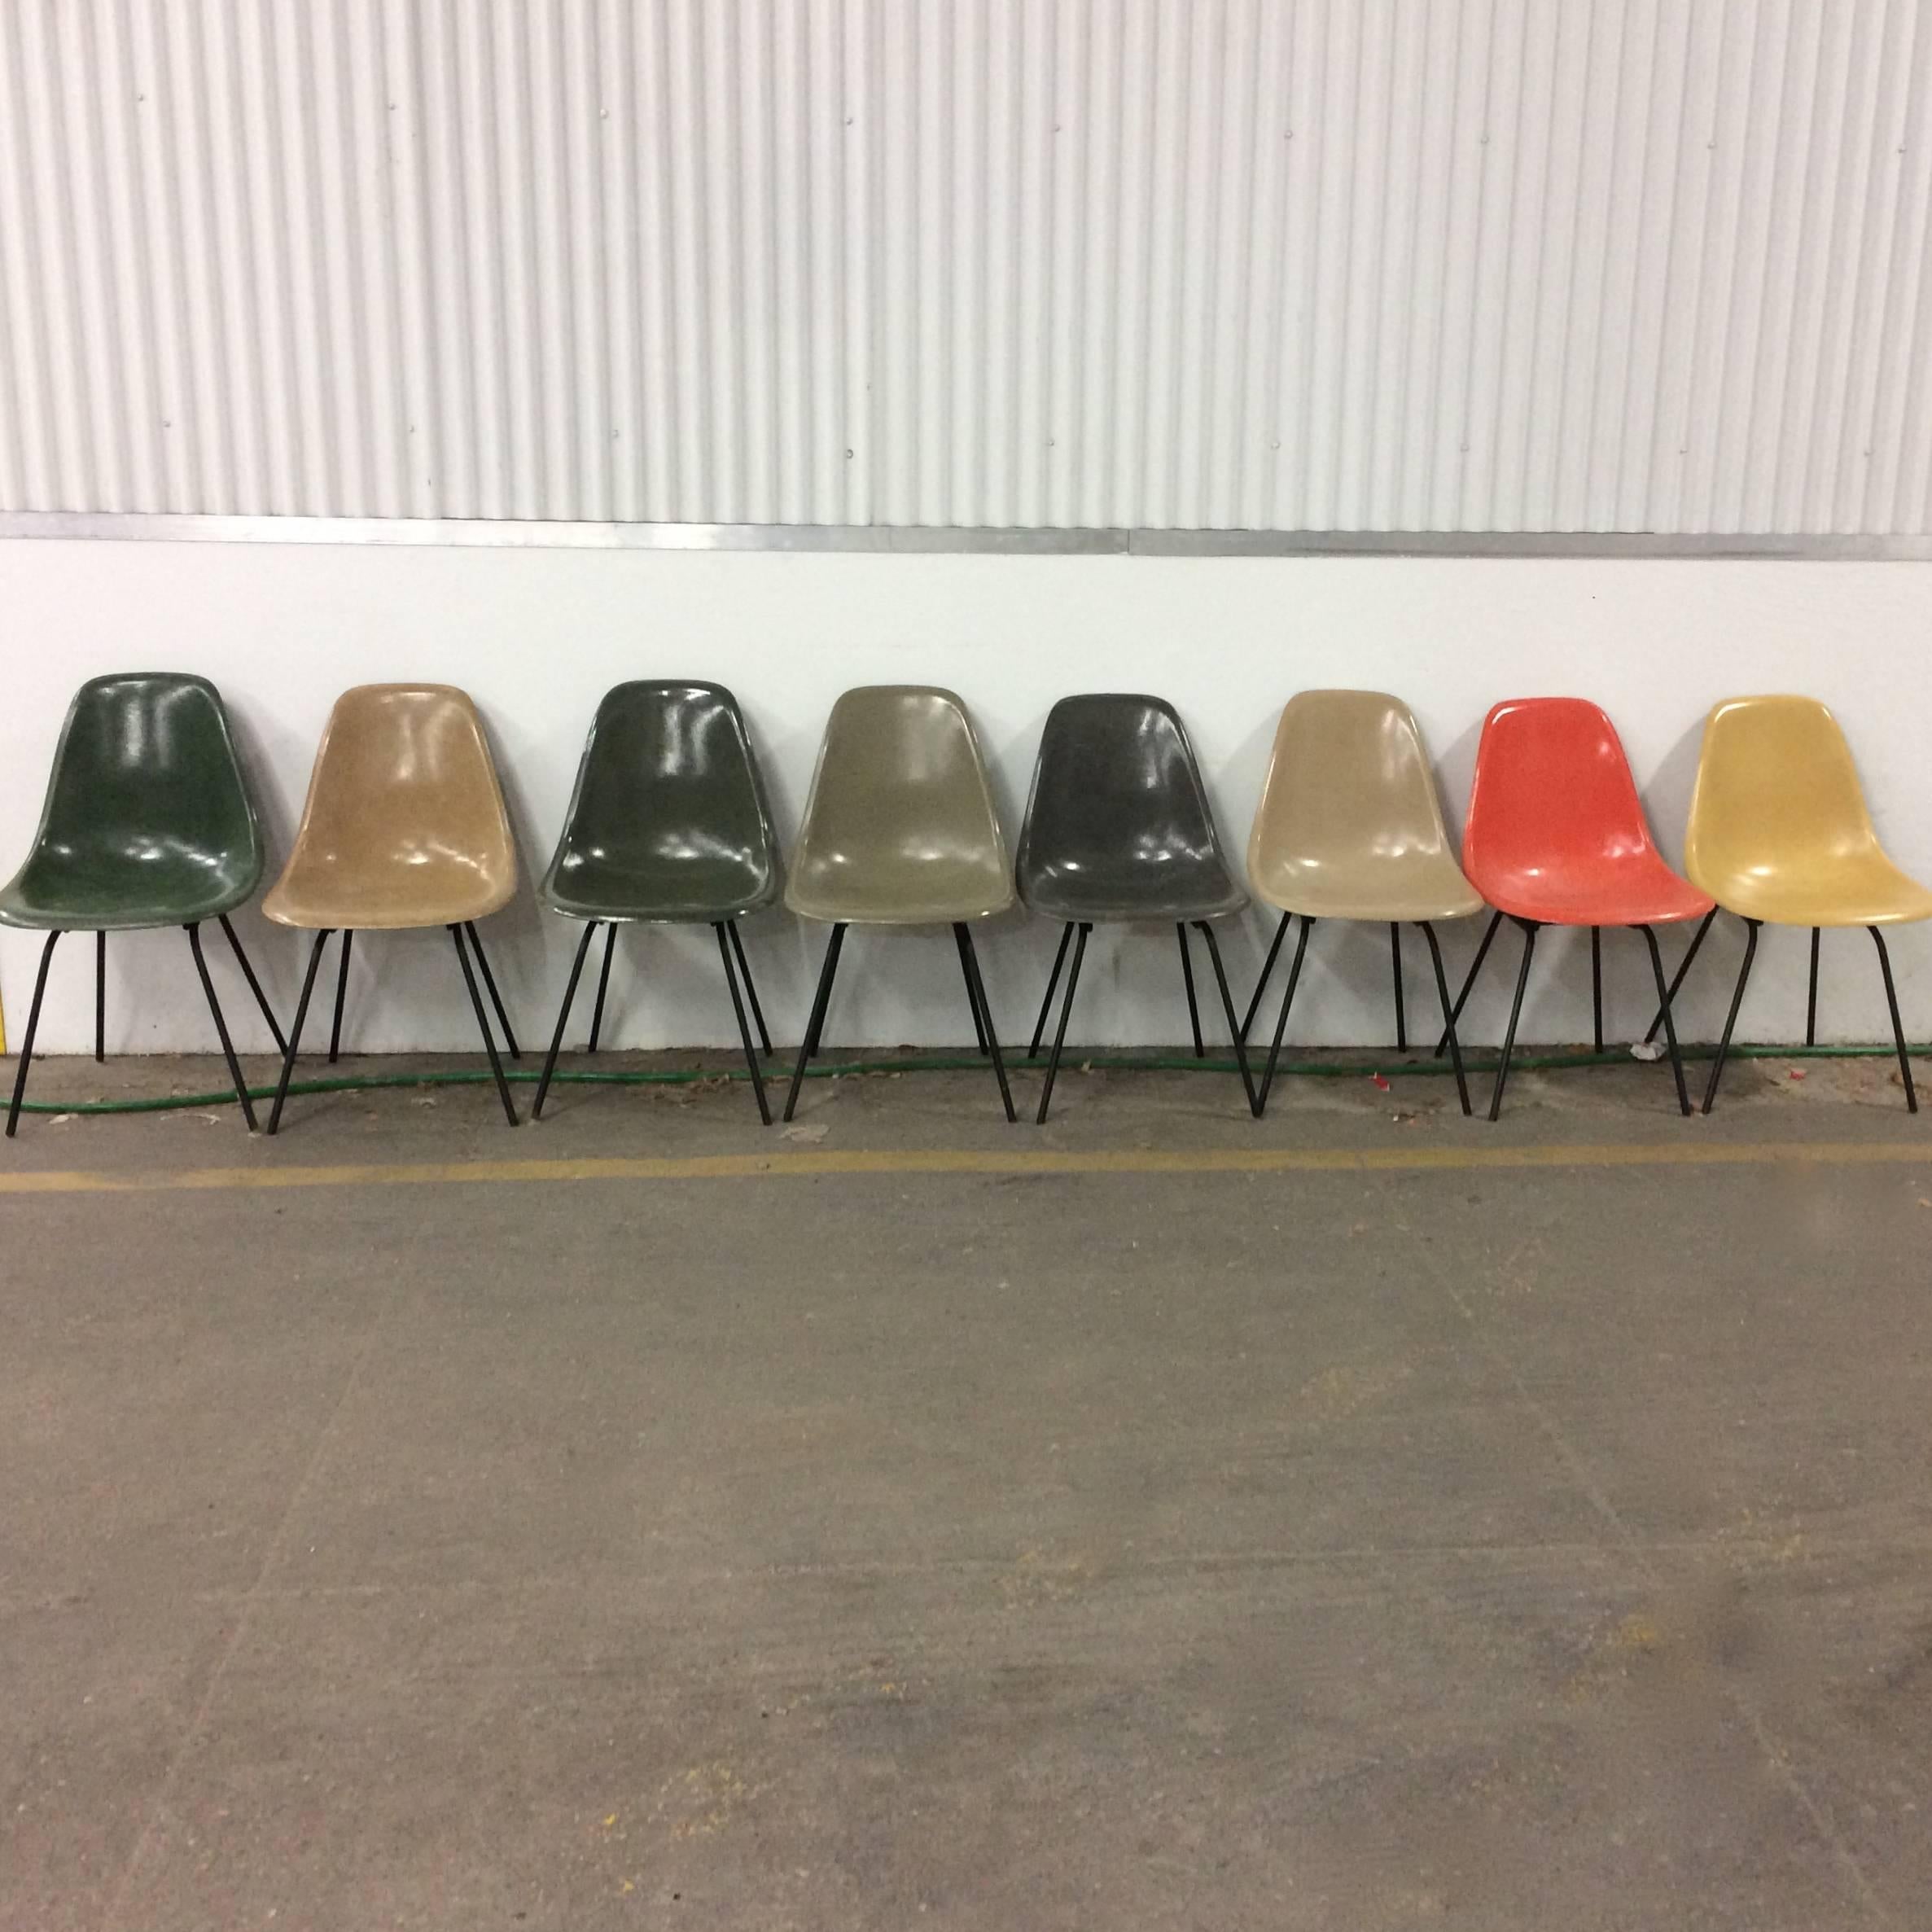 Set of 8 Herman Miller Eames DSX chairs. Forest green, light brown, olive green, raw umber, elephant hide grey, greige, red orange, ochre. The bases are missing some glides in the photos but they have all been installed. The only set like it. None